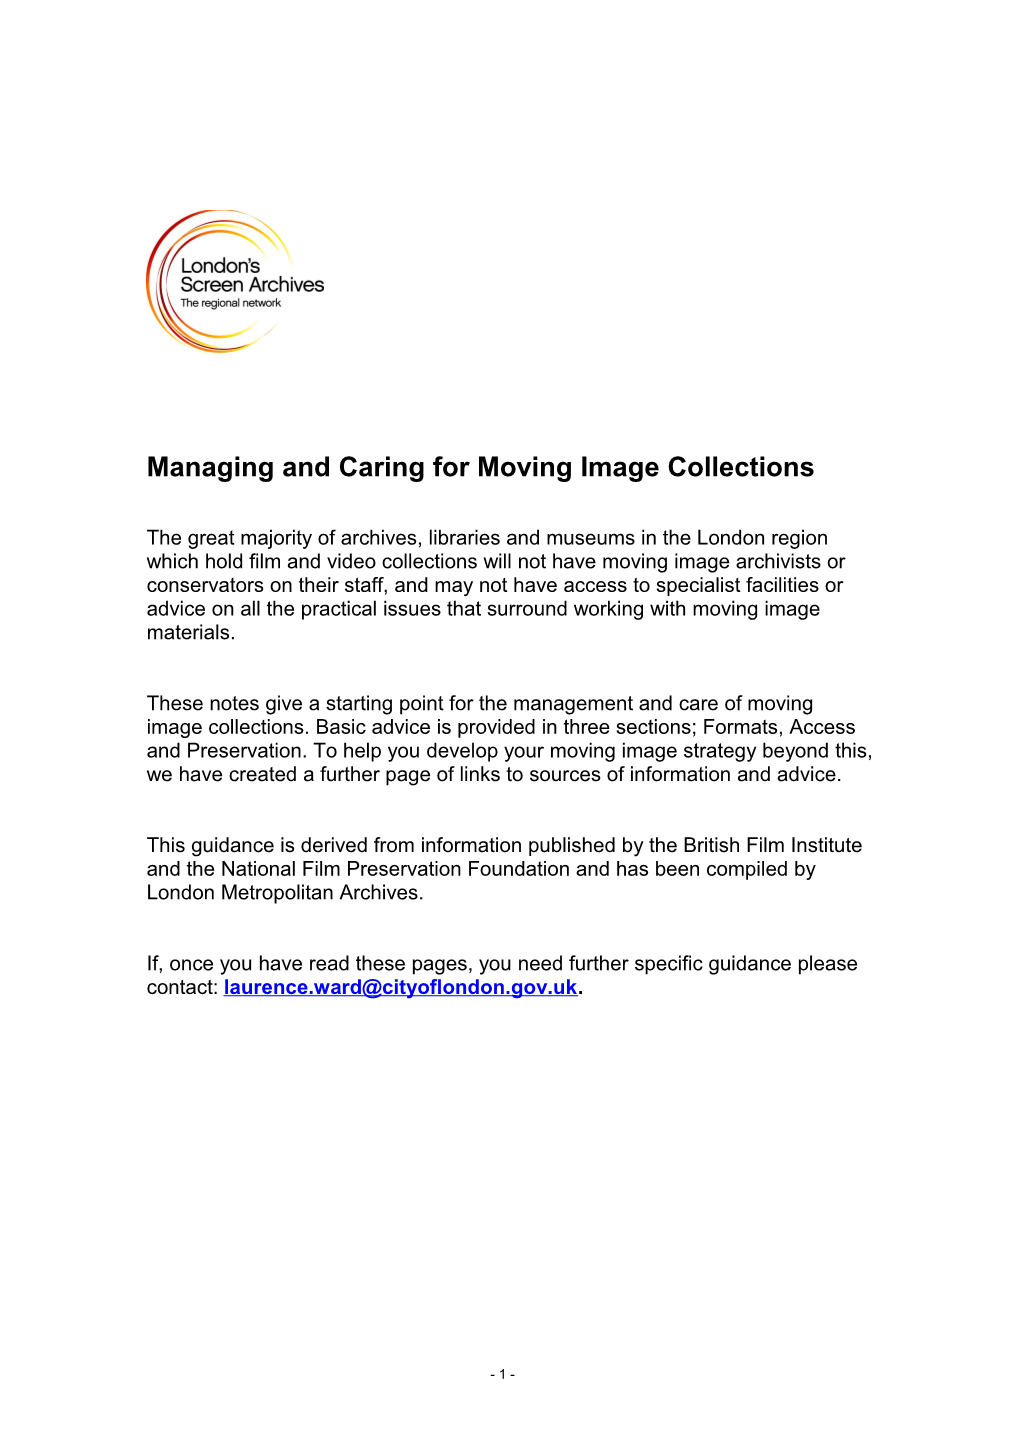 Managing and Caring for Moving Image Collections